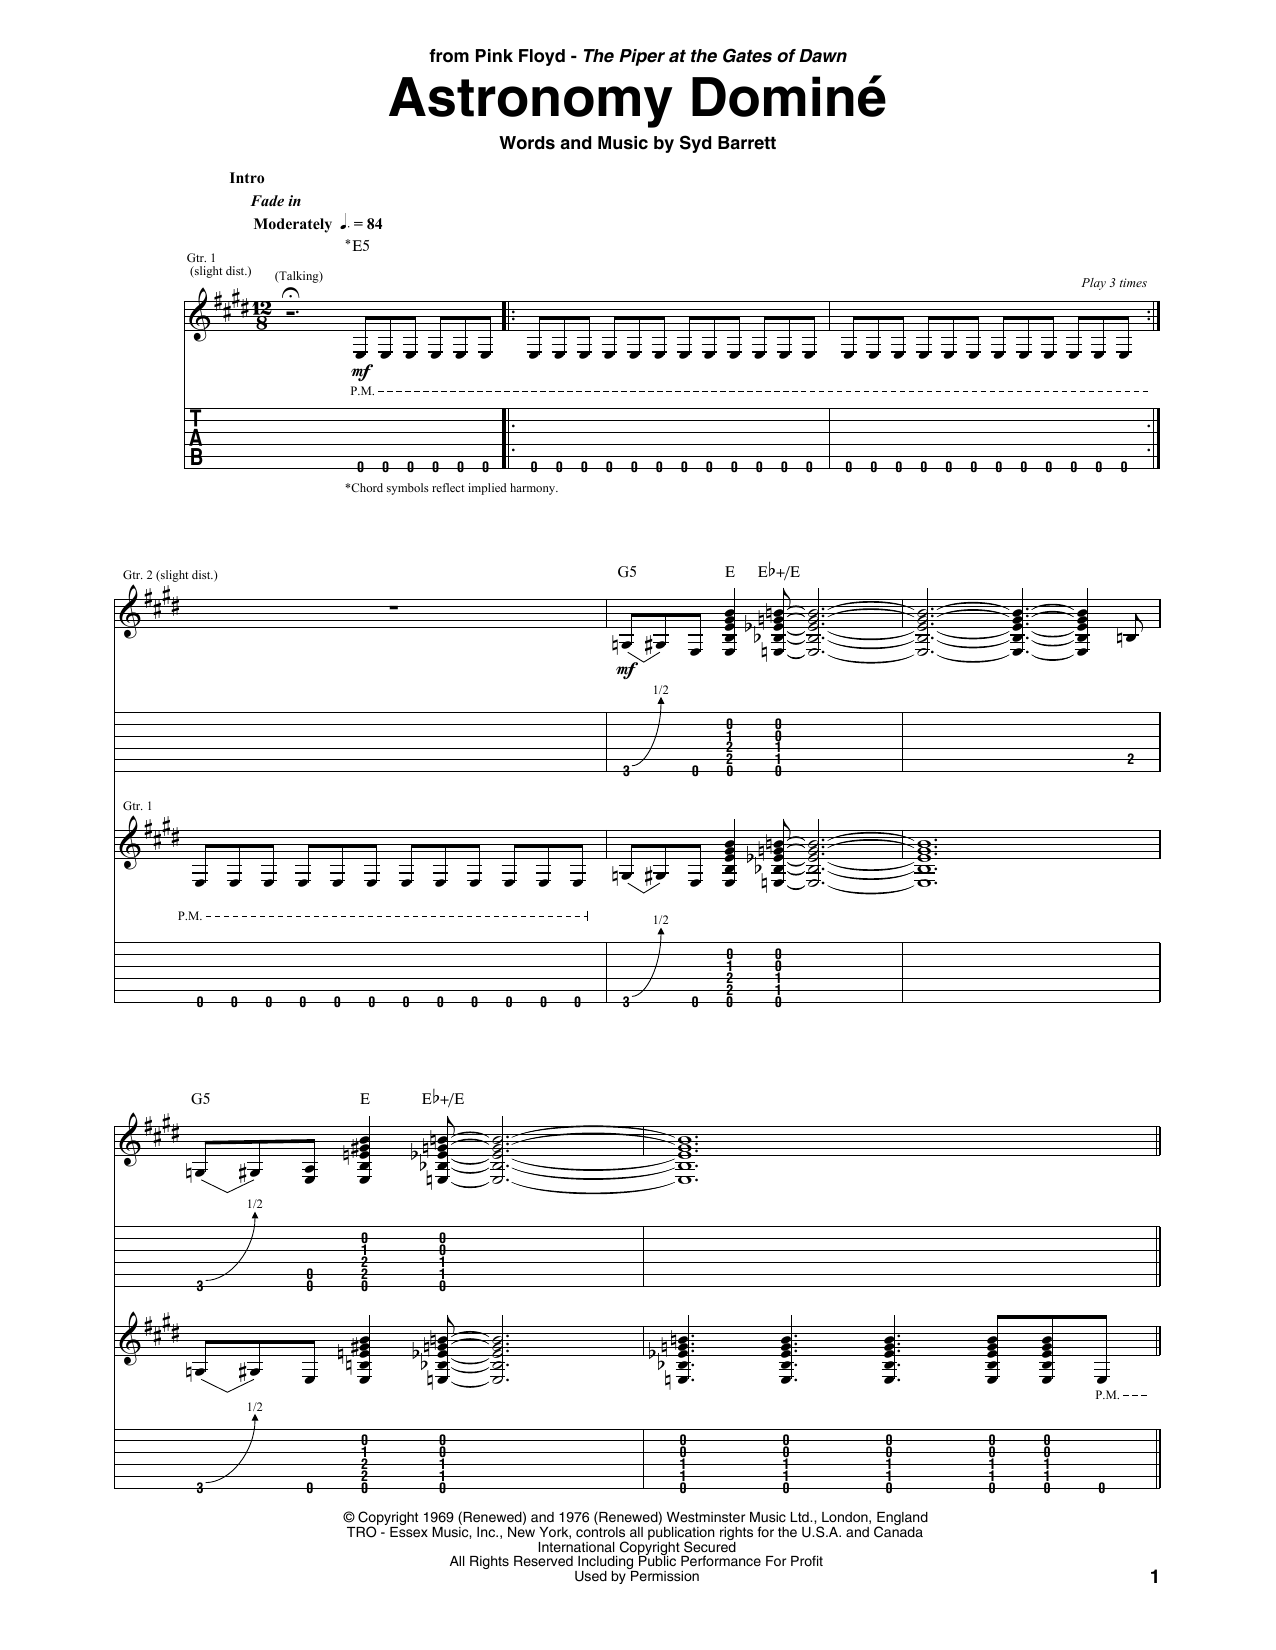 Download Pink Floyd Astronomy Domine Sheet Music